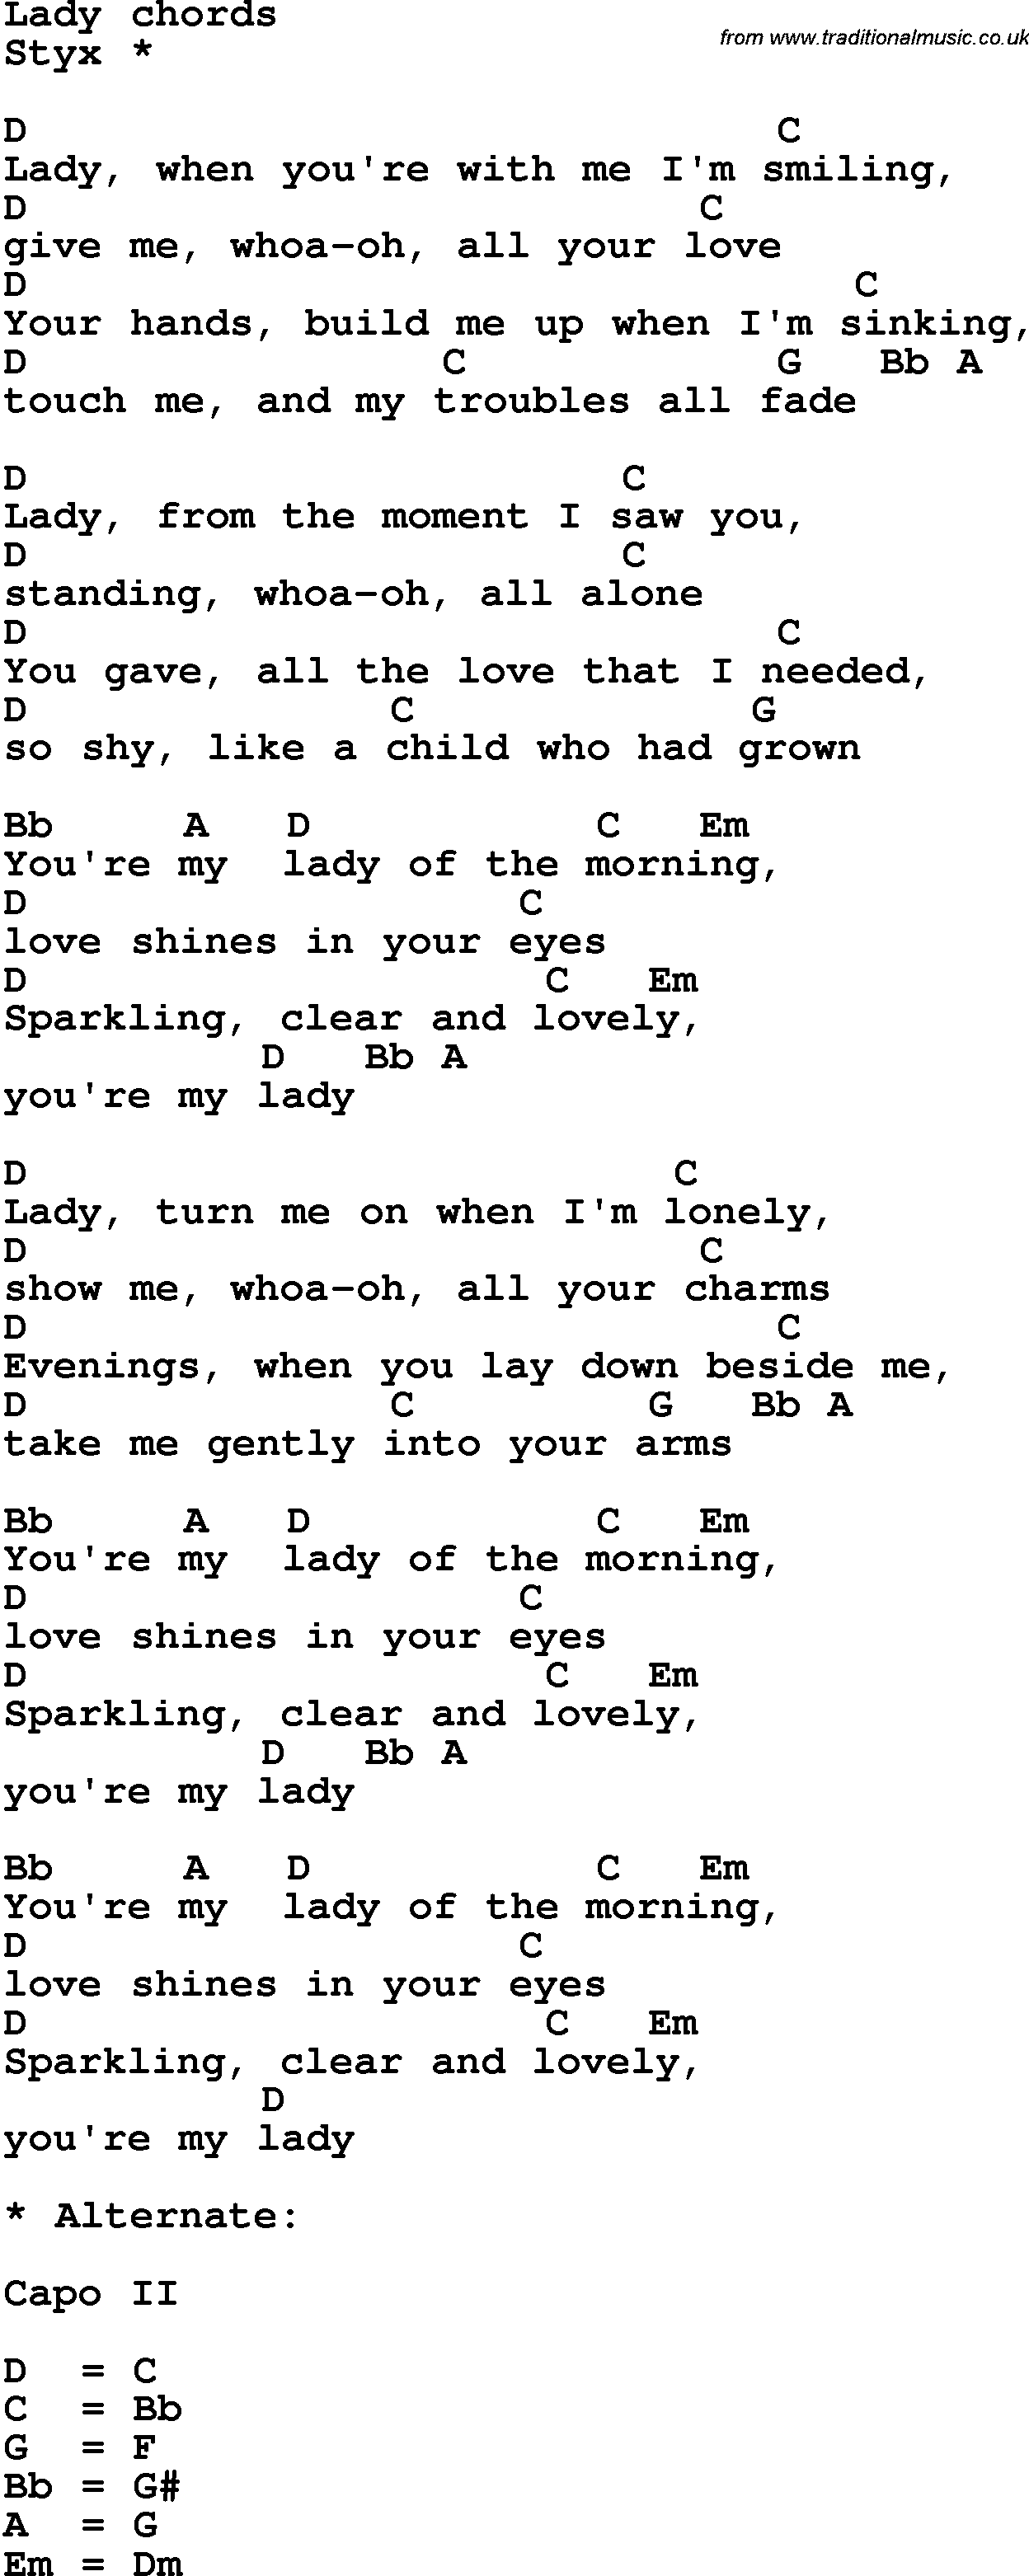 Song Lyrics with guitar chords for Lady